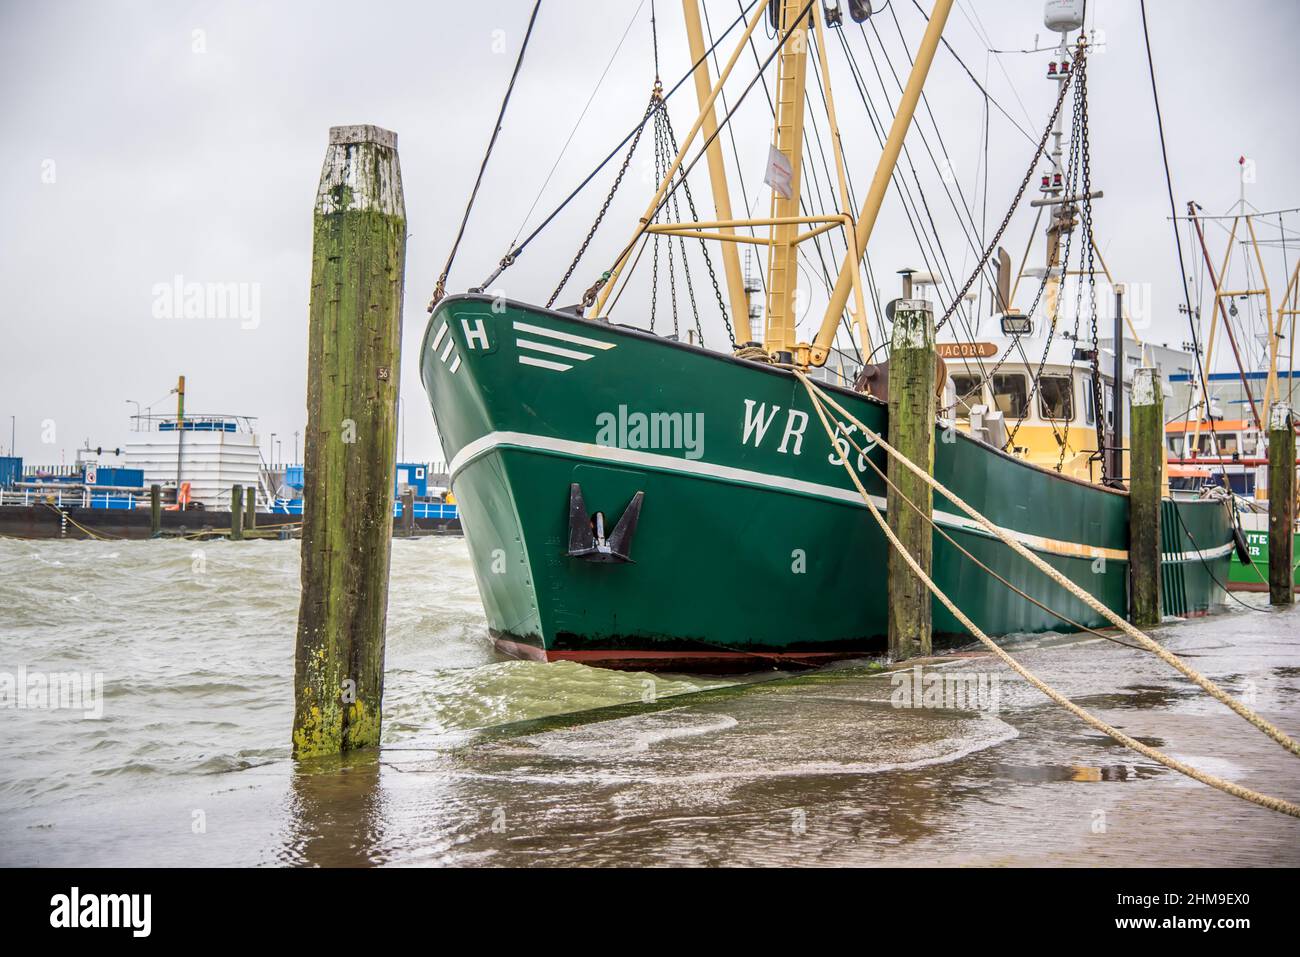 Den Oever, the Netherlands. January 2022. High tide in the harbor of Den Oever, Netherlands. High quality photo Stock Photo